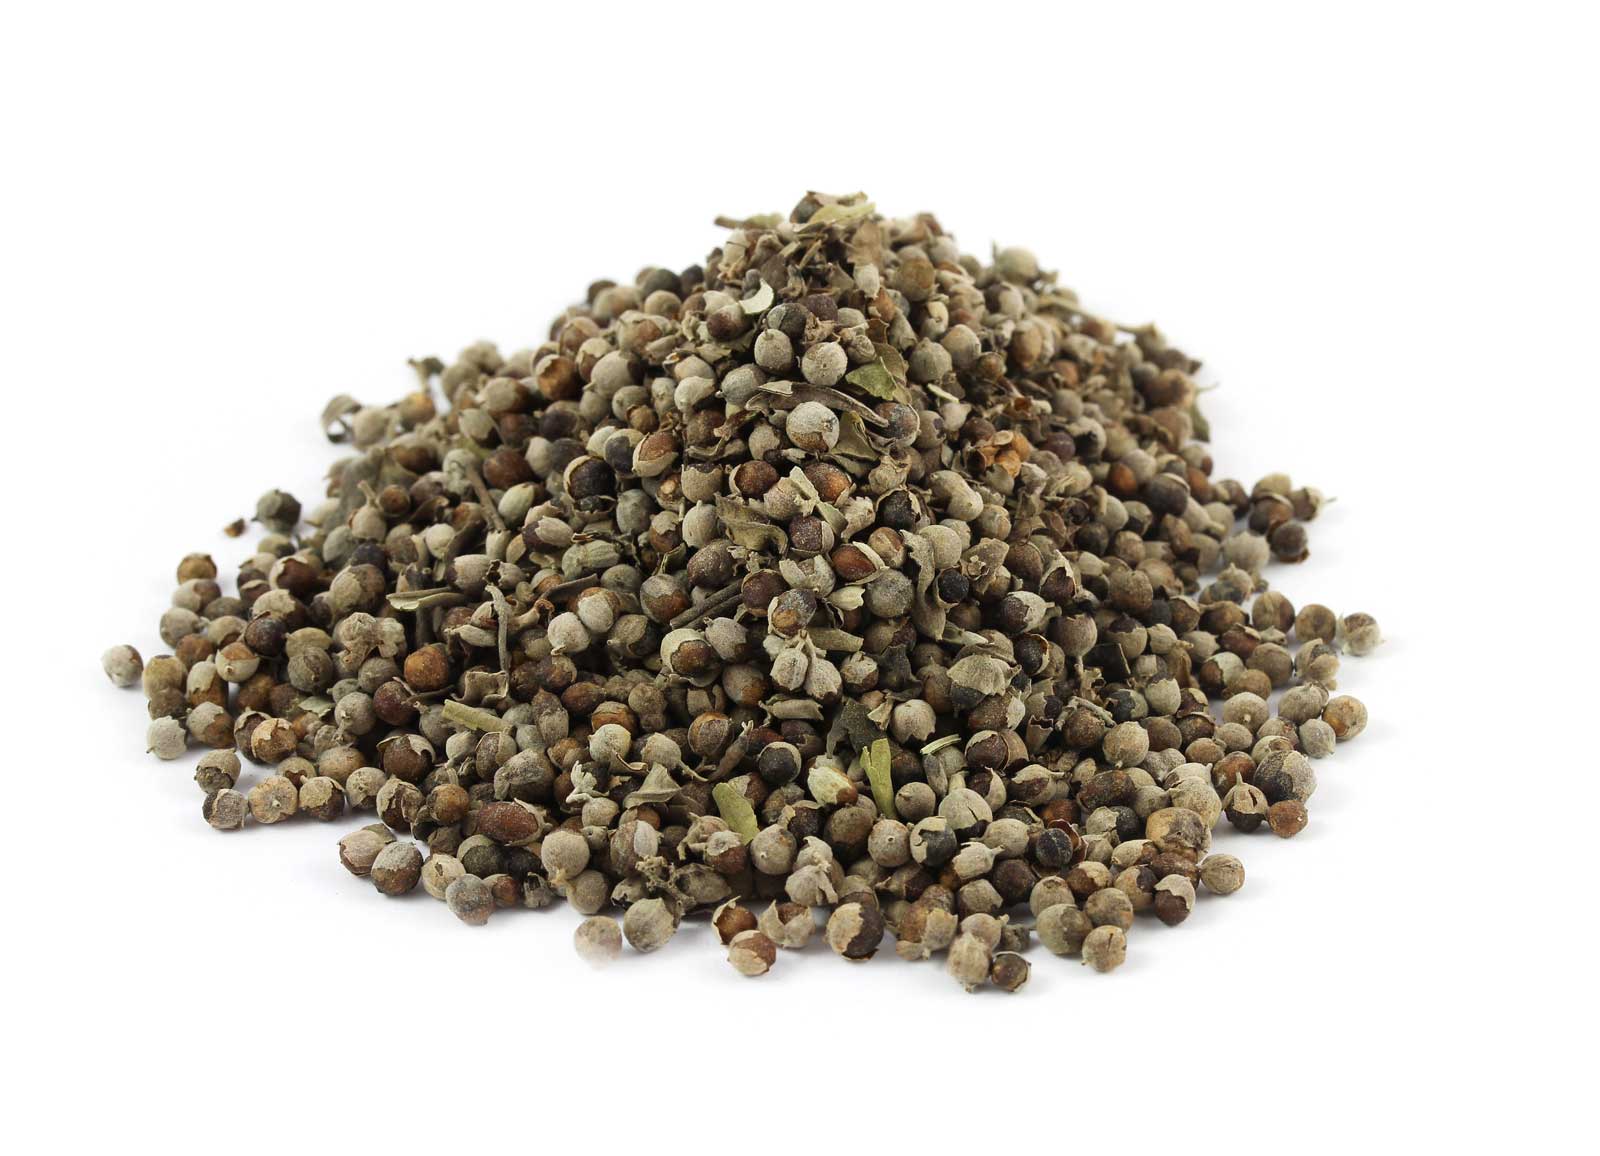 Dry vitex fruits (Vitex agnus-castus L.). This drug (Agni casti fructus) is used to alleviate symptoms of various gynecological problems like management of premenstrual stress syndrome (PMS).